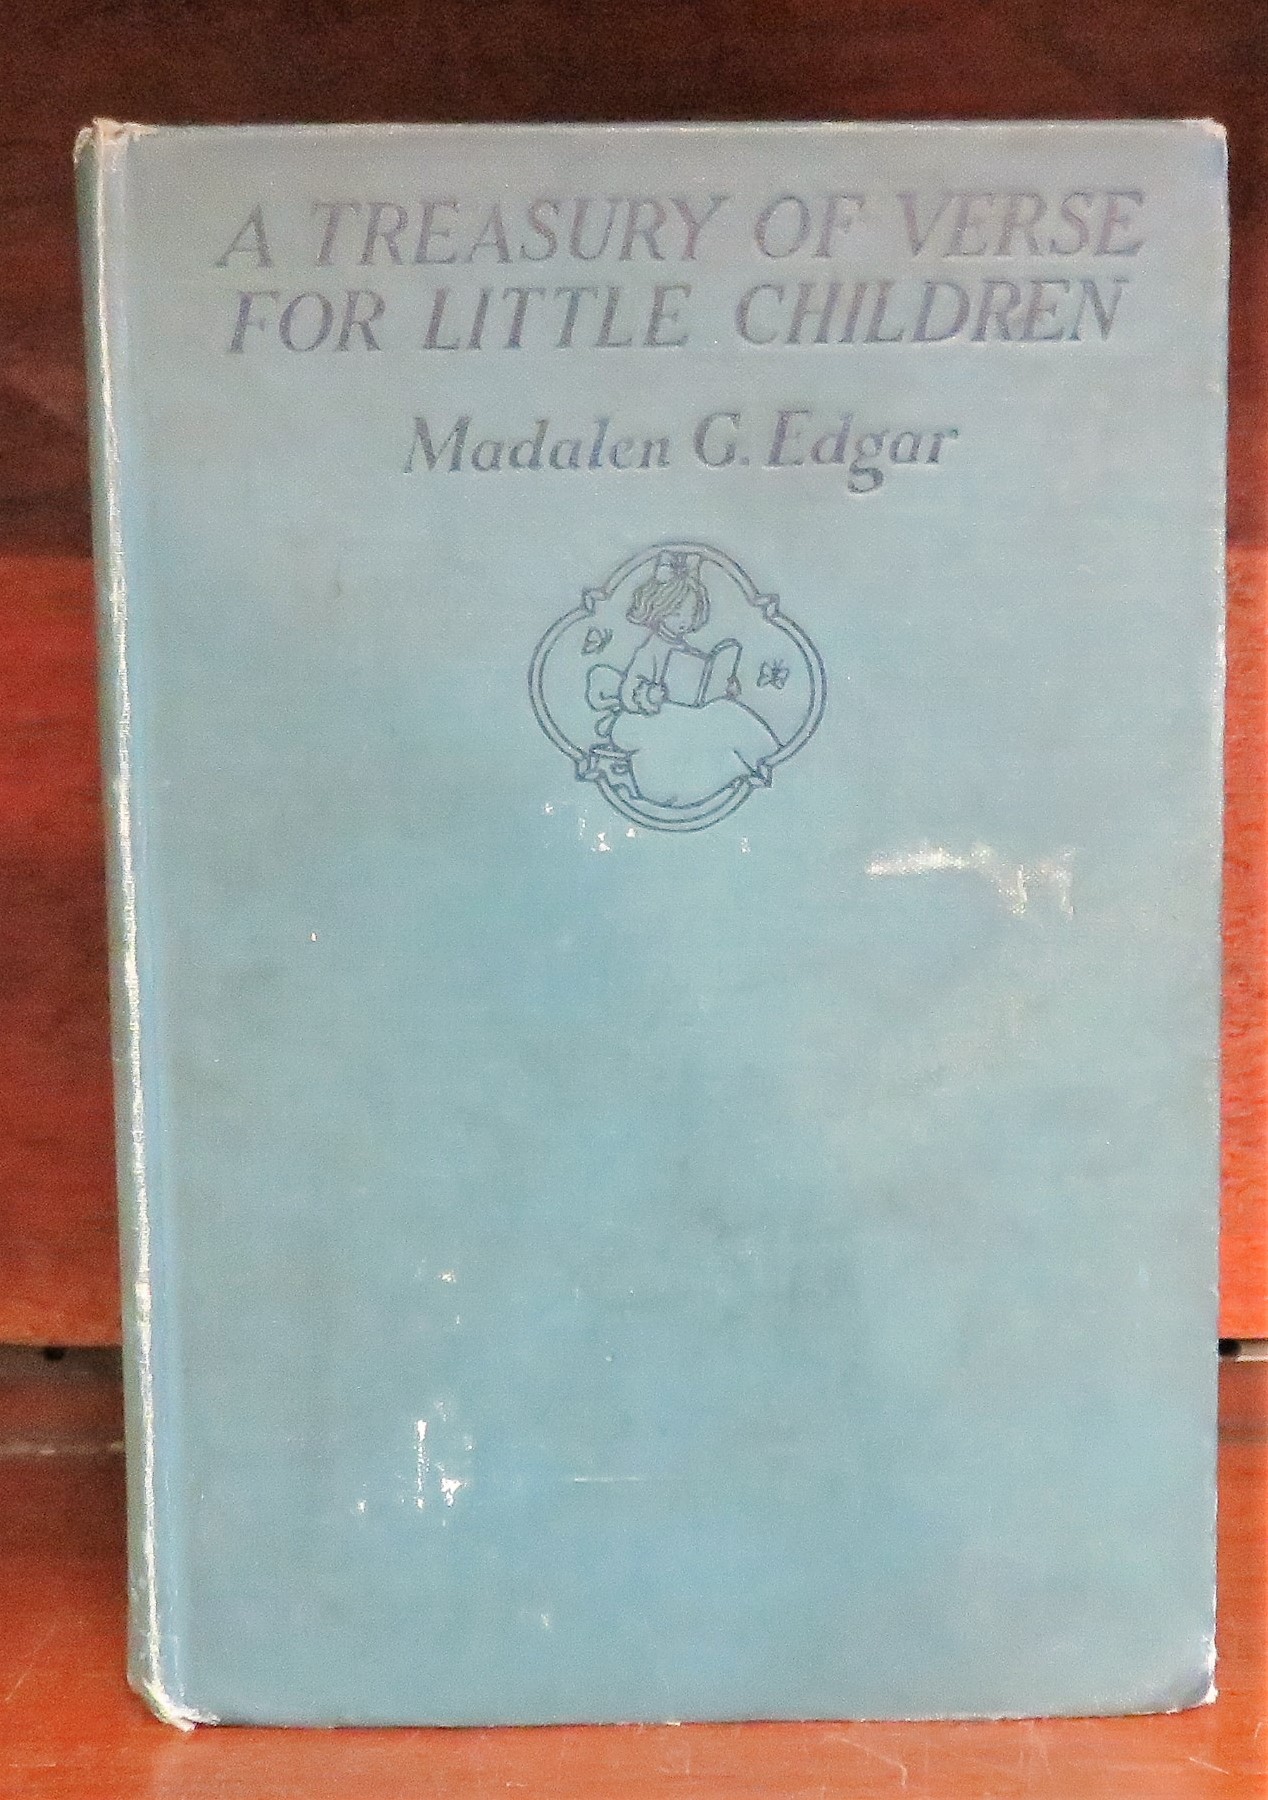 A Treasury of Verse for Little Children